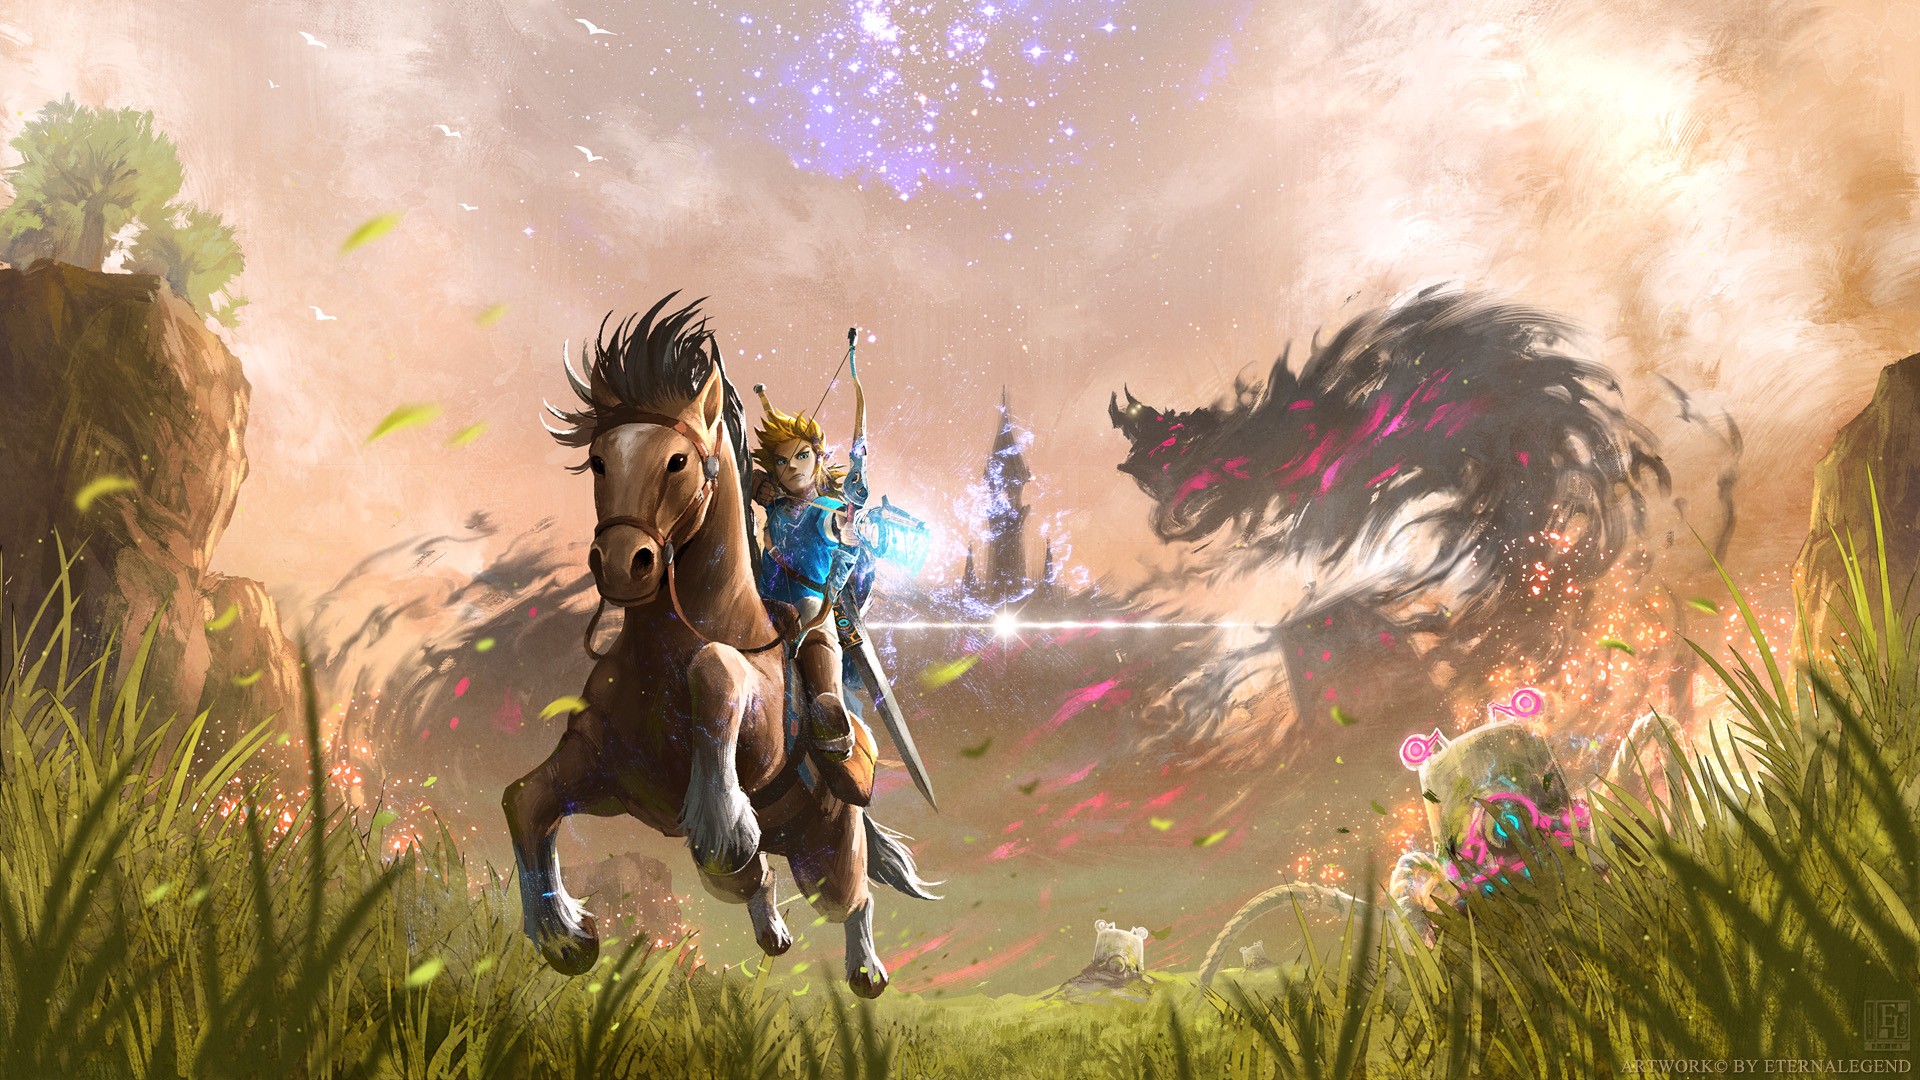 Anime 1920x1080 The Legend of Zelda Nintendo Link video games The Legend of Zelda: Breath of the Wild watermarked Video Game Heroes bow and arrow video game art